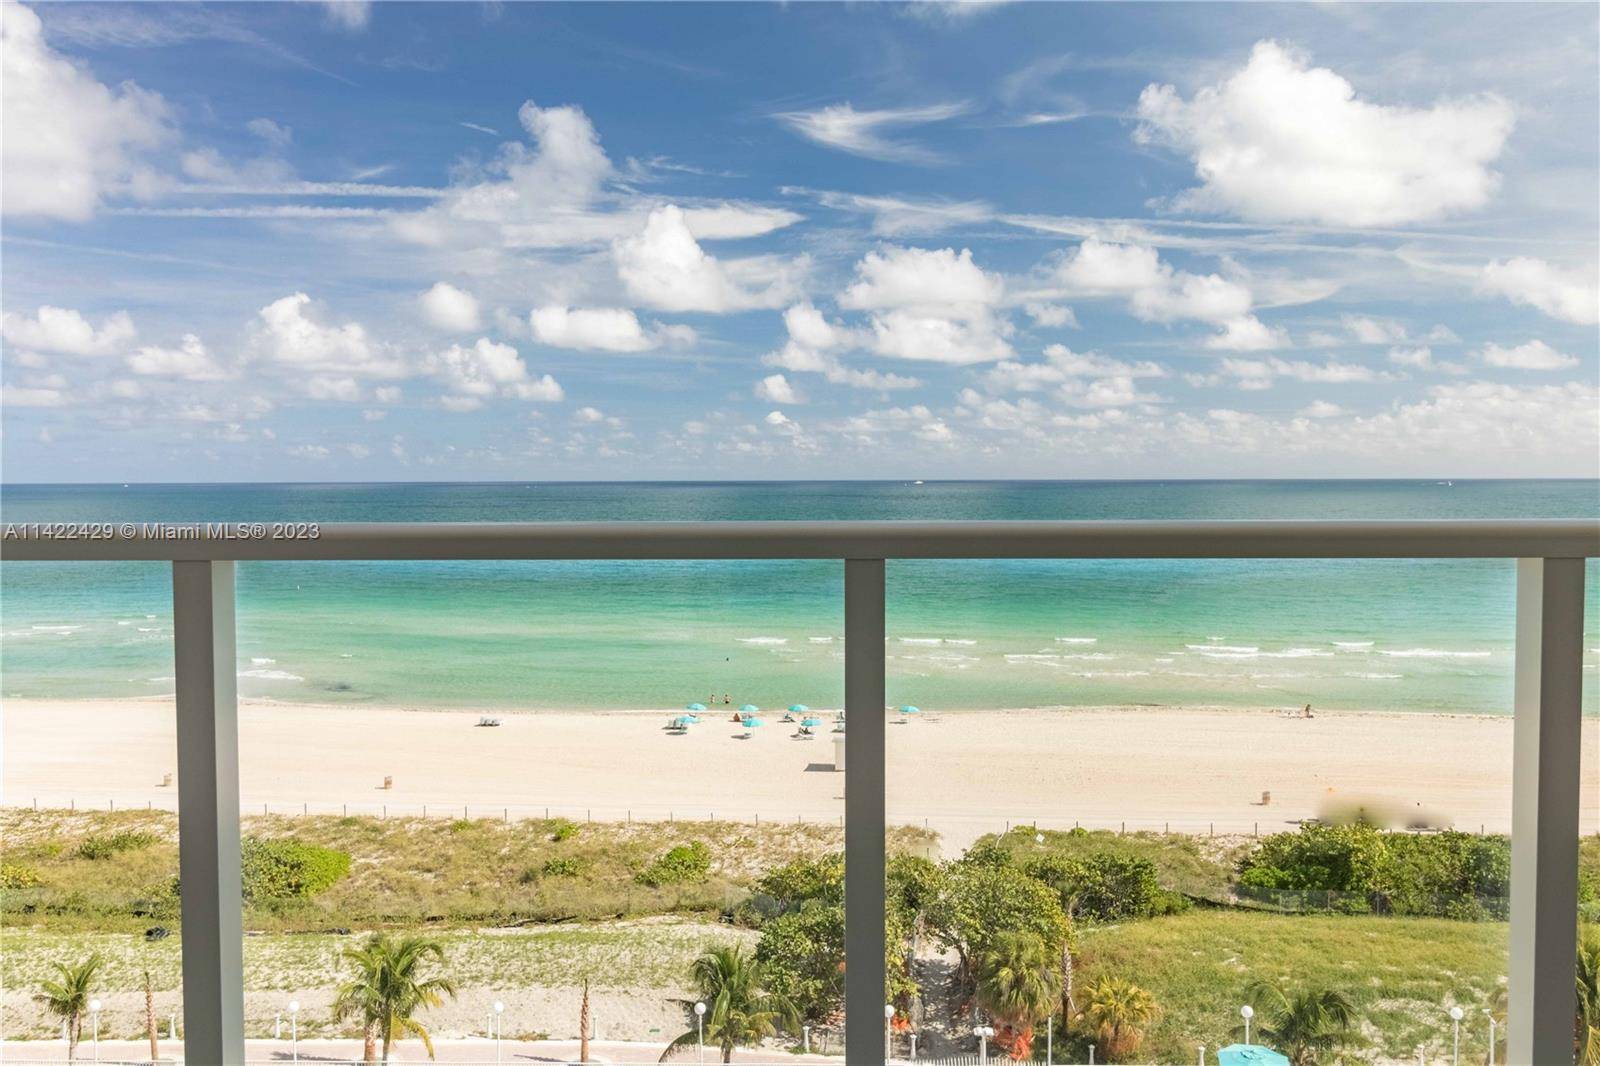 OCEAN FRONT UNIT. ENJOY THE SPECTACULAR VIEWS AND AMENITIES OF THIS GORGEOUS ONE BEDROOM TWO BATH APARTMENT.